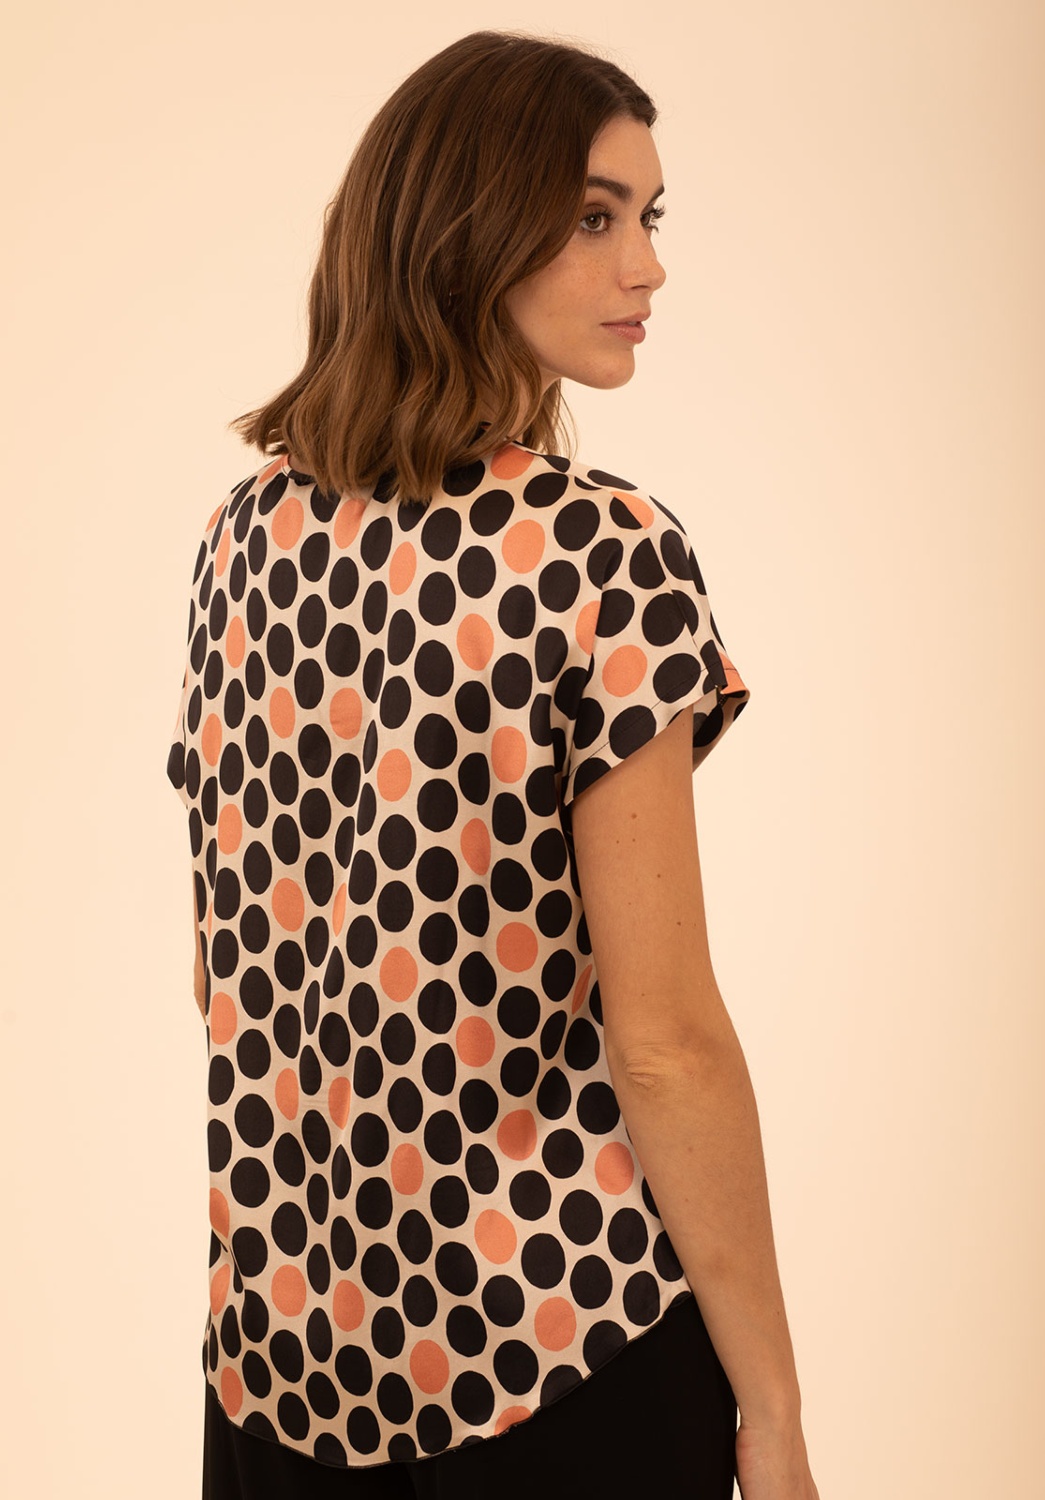 Knotted Polka Dot Blouse 1